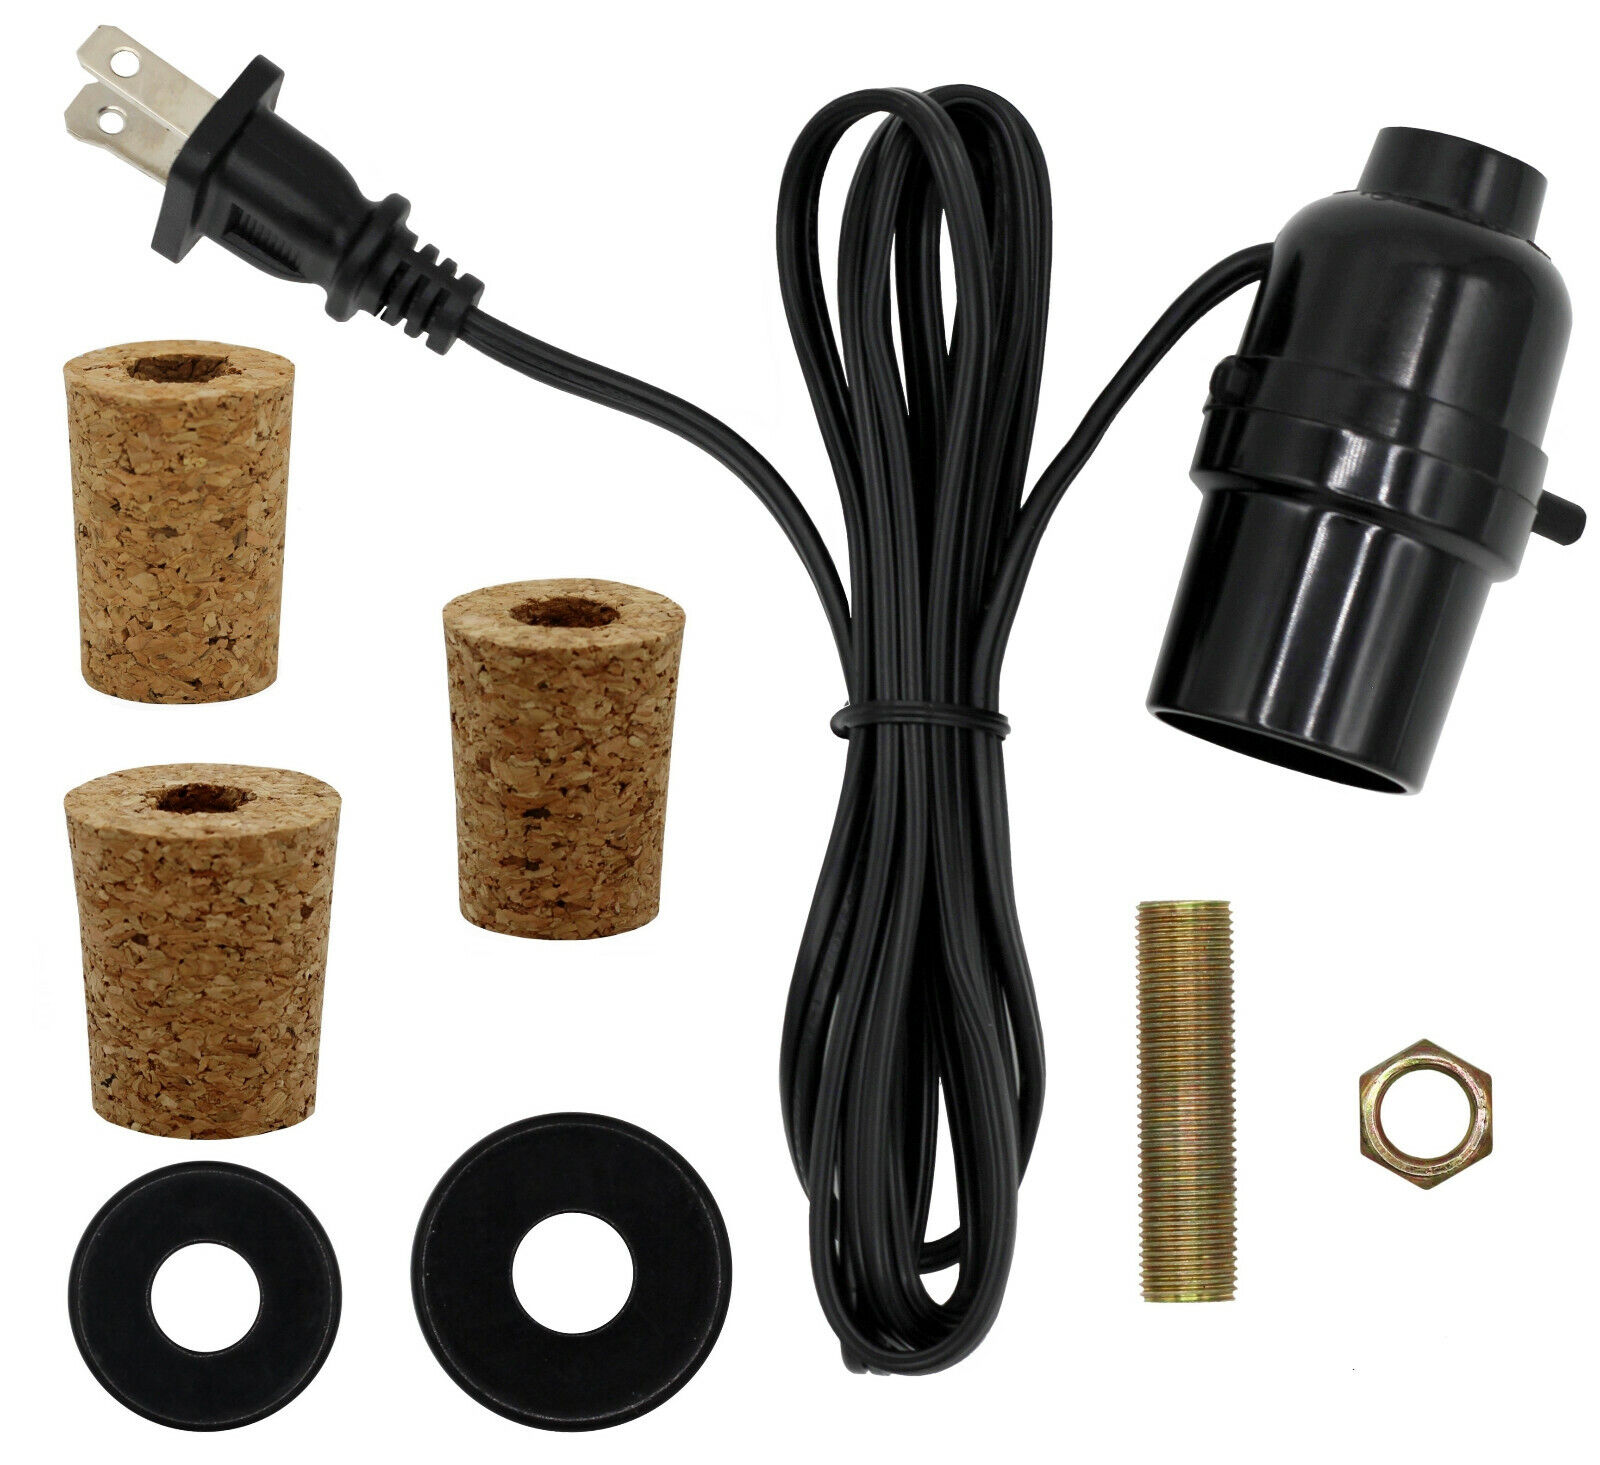 Pre-Wired Bottle Lamp Kit, Easily Convert Any Bottle Into A Lamp, DIY (Black)